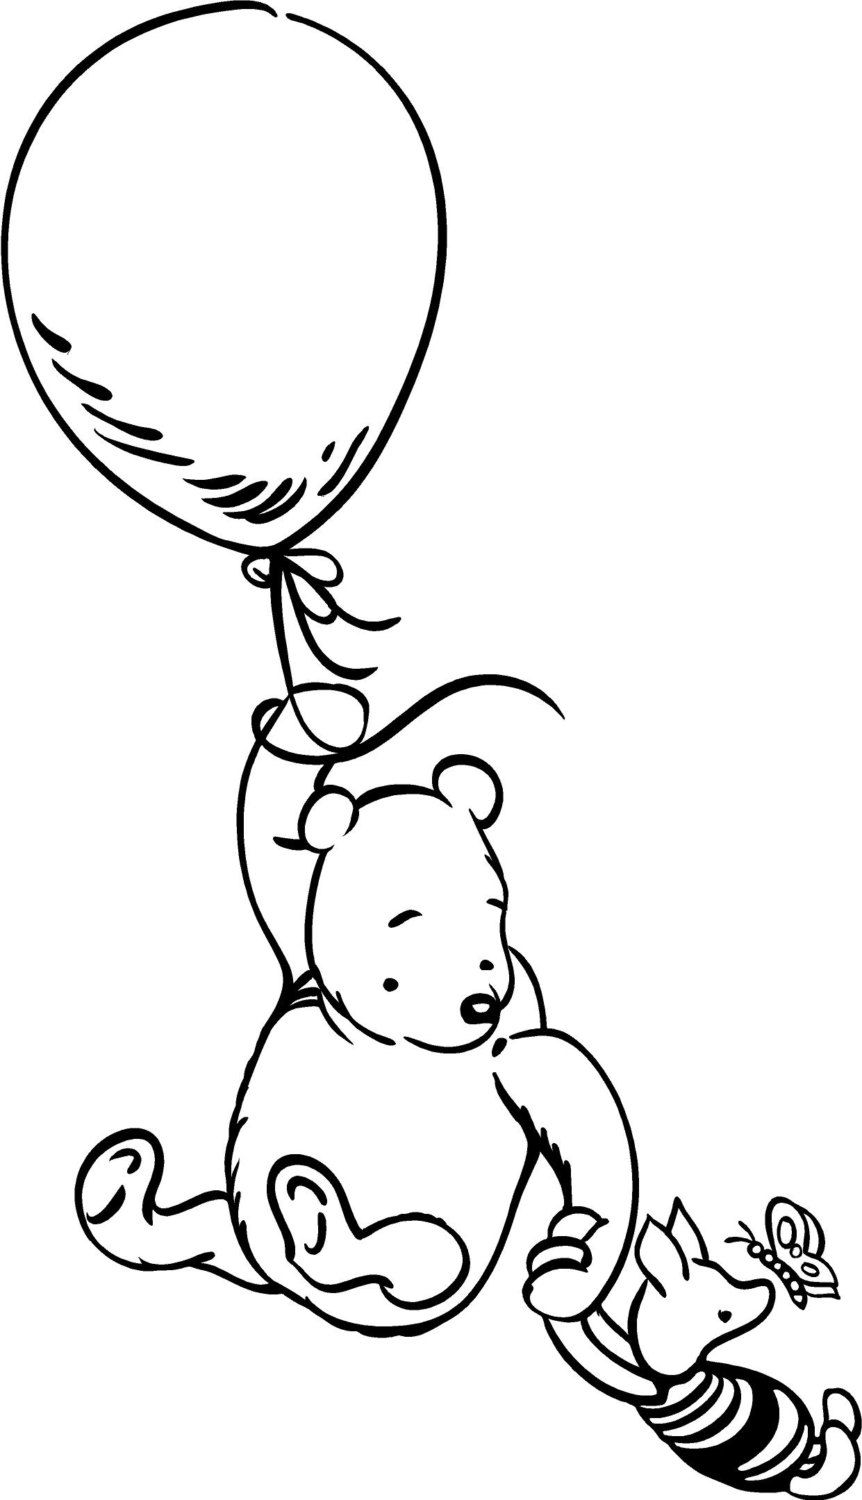 classic winnie the pooh coloring pages at getcolorings